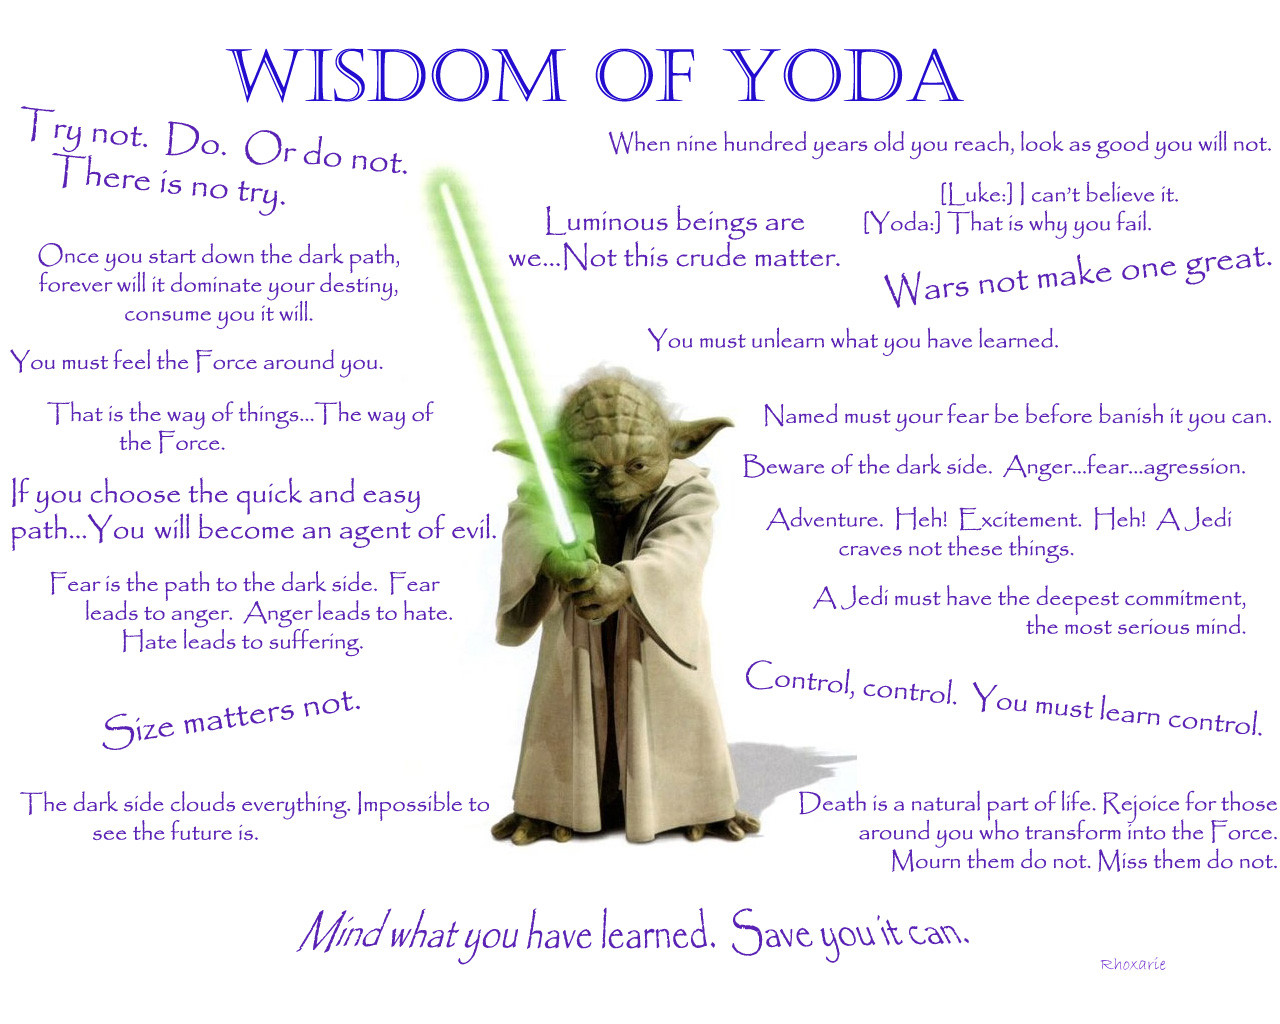 Funny Star Wars Quotes
 Dawn Meredith Children s Author Star Wars The Wisdom